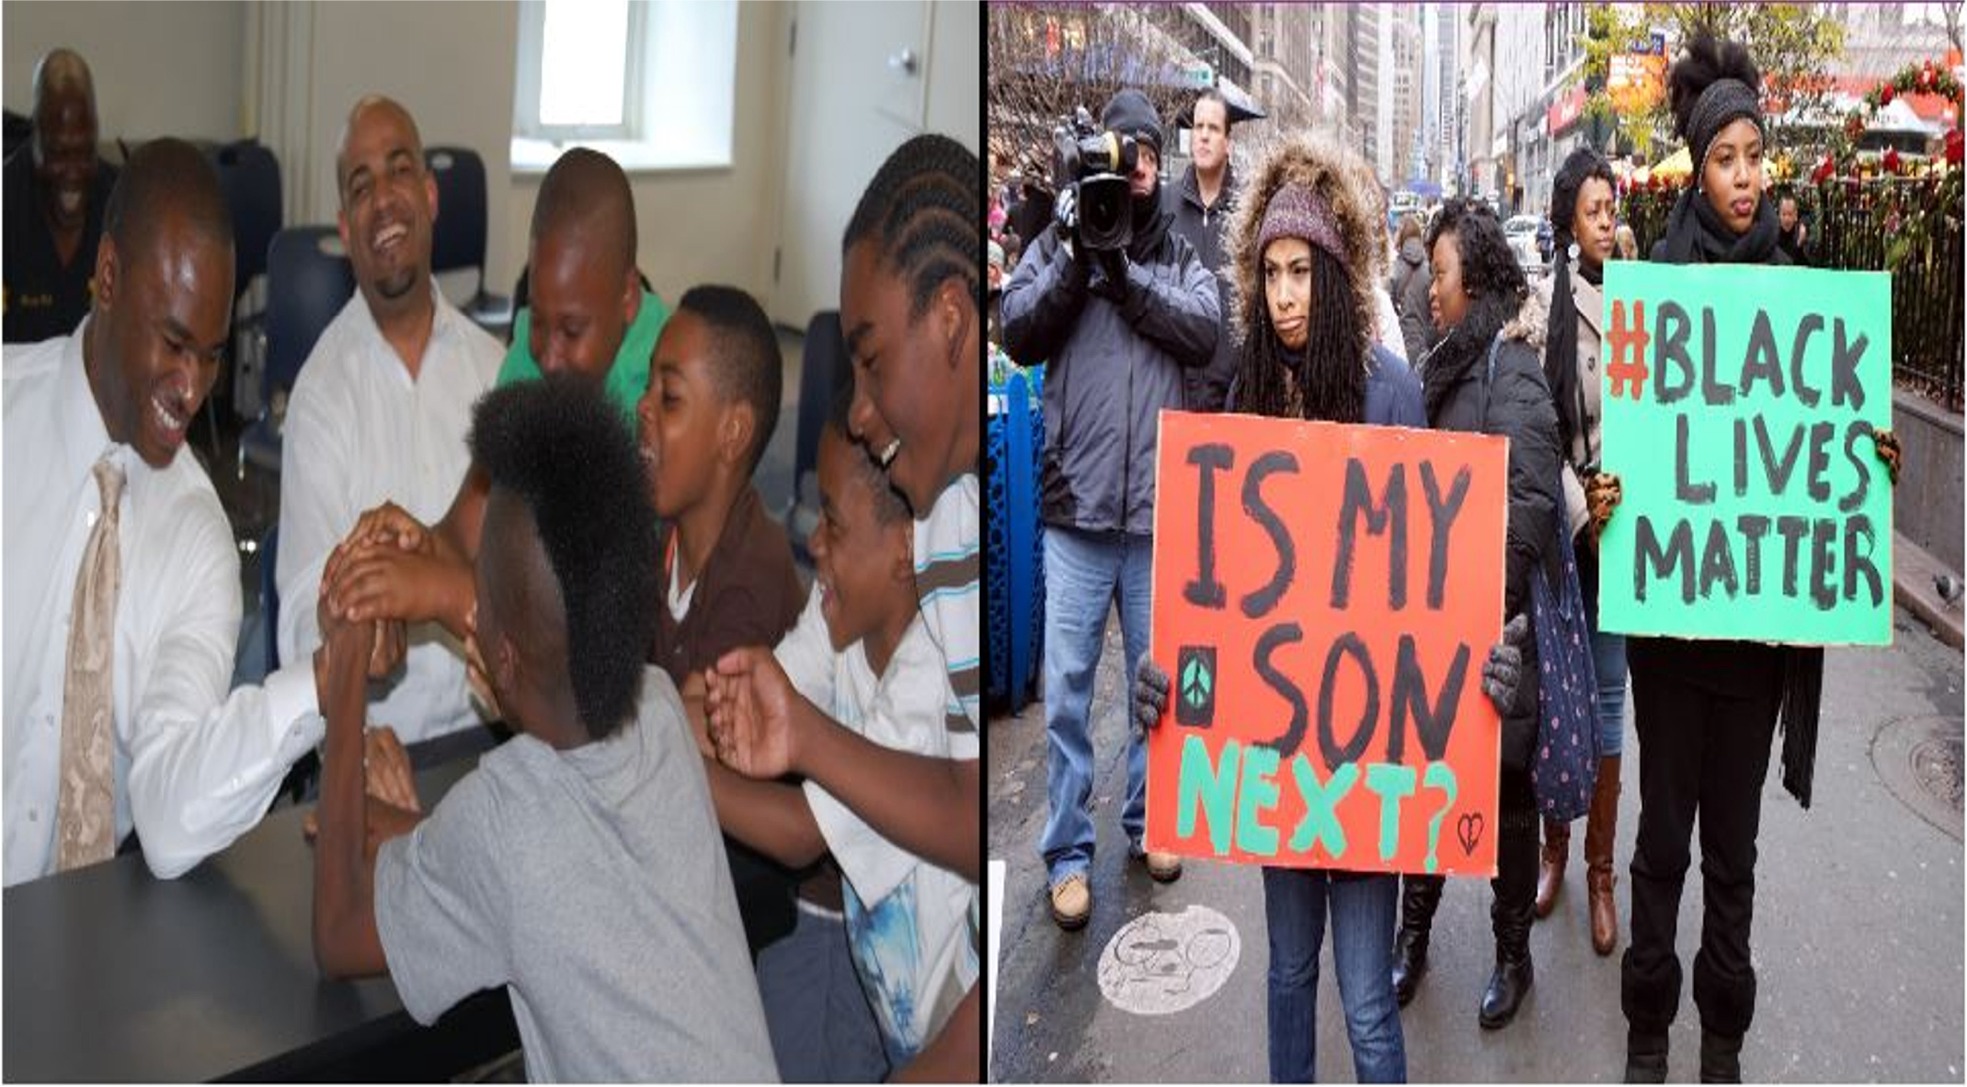 Which group is actually showing Black Lives Matter?